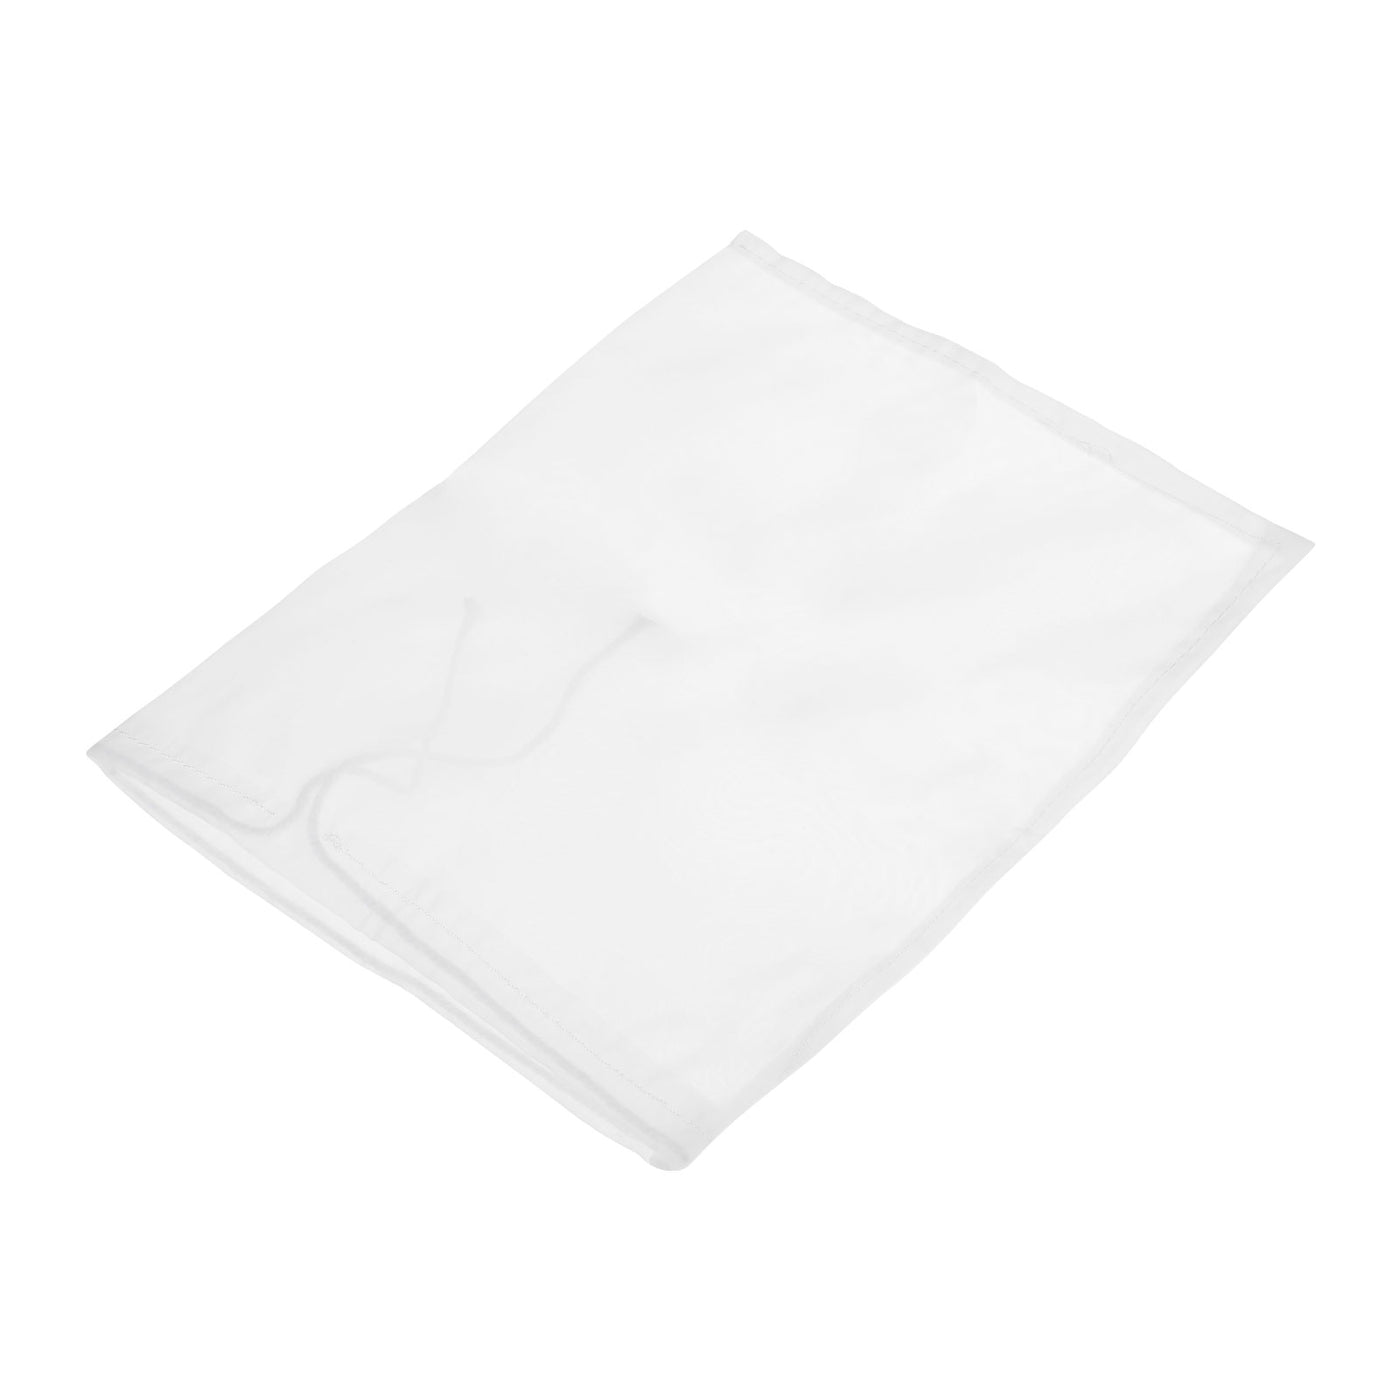 uxcell Uxcell Paint Filter Bag 200 Mesh (10.6"x7.9") Nylon Strainer for Filtering Paint